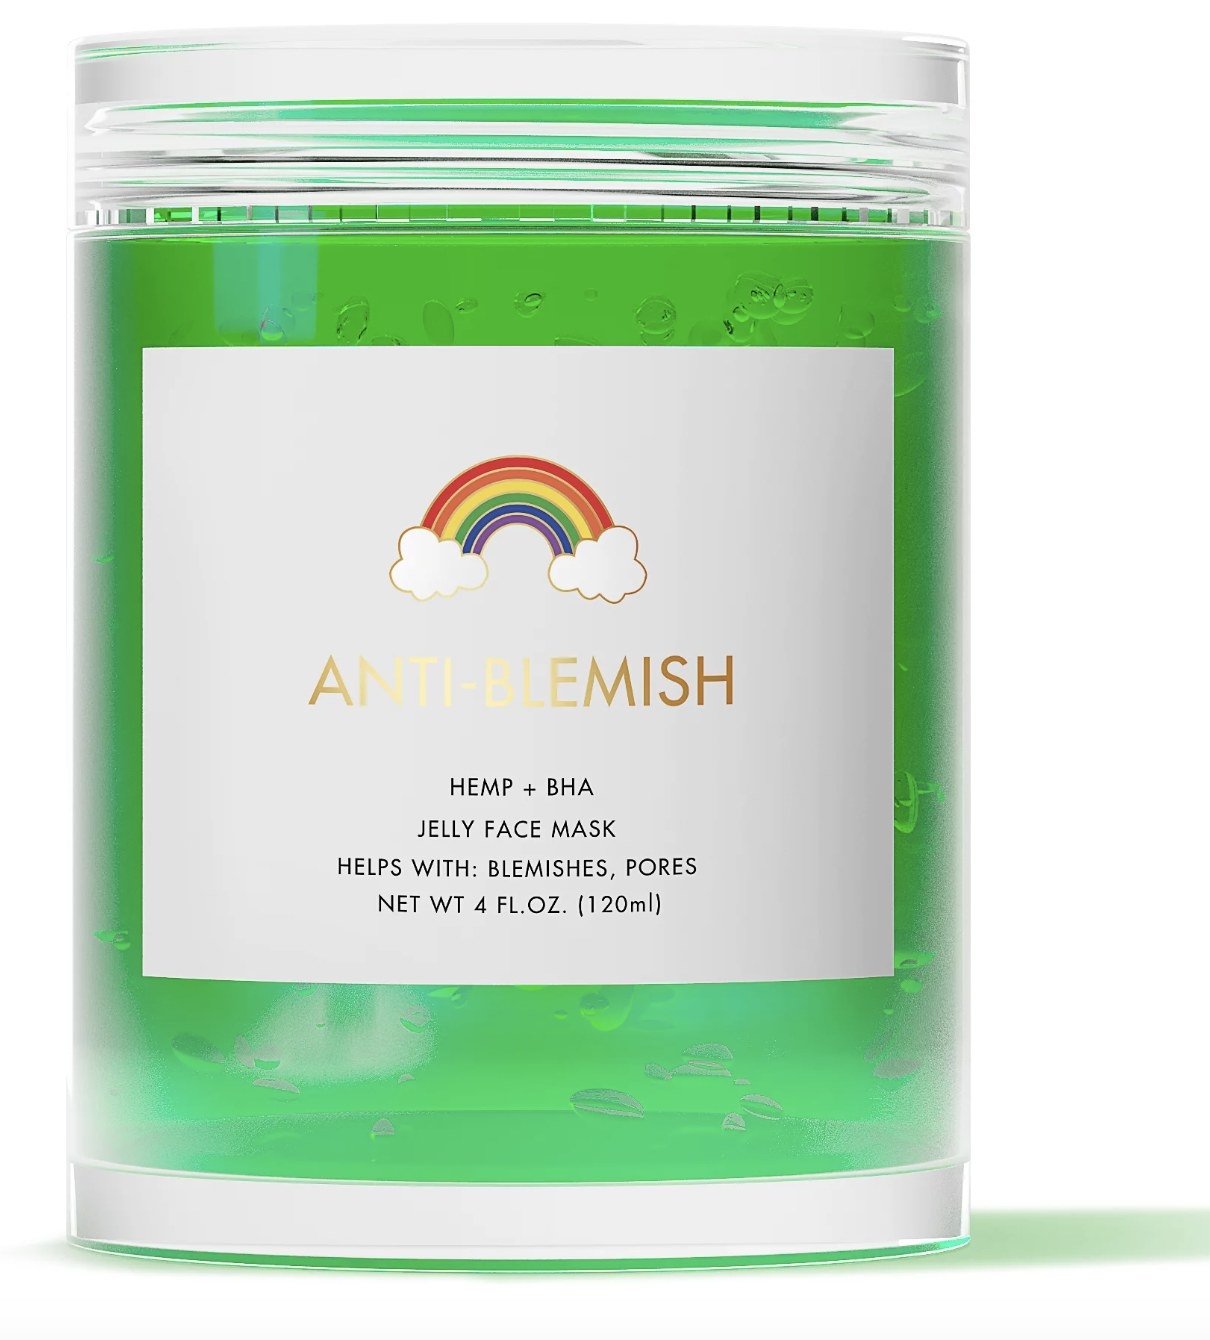 The clear jar is full of bright green material and wrapped with a rainbow label